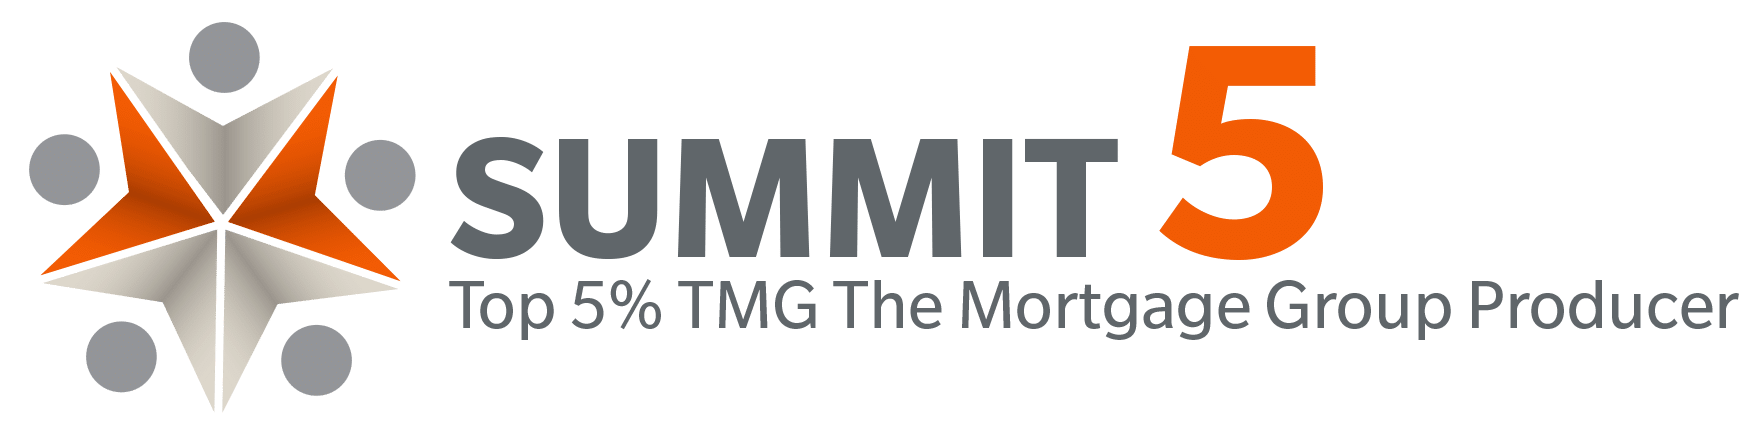 Summit5 BadgeWithTag